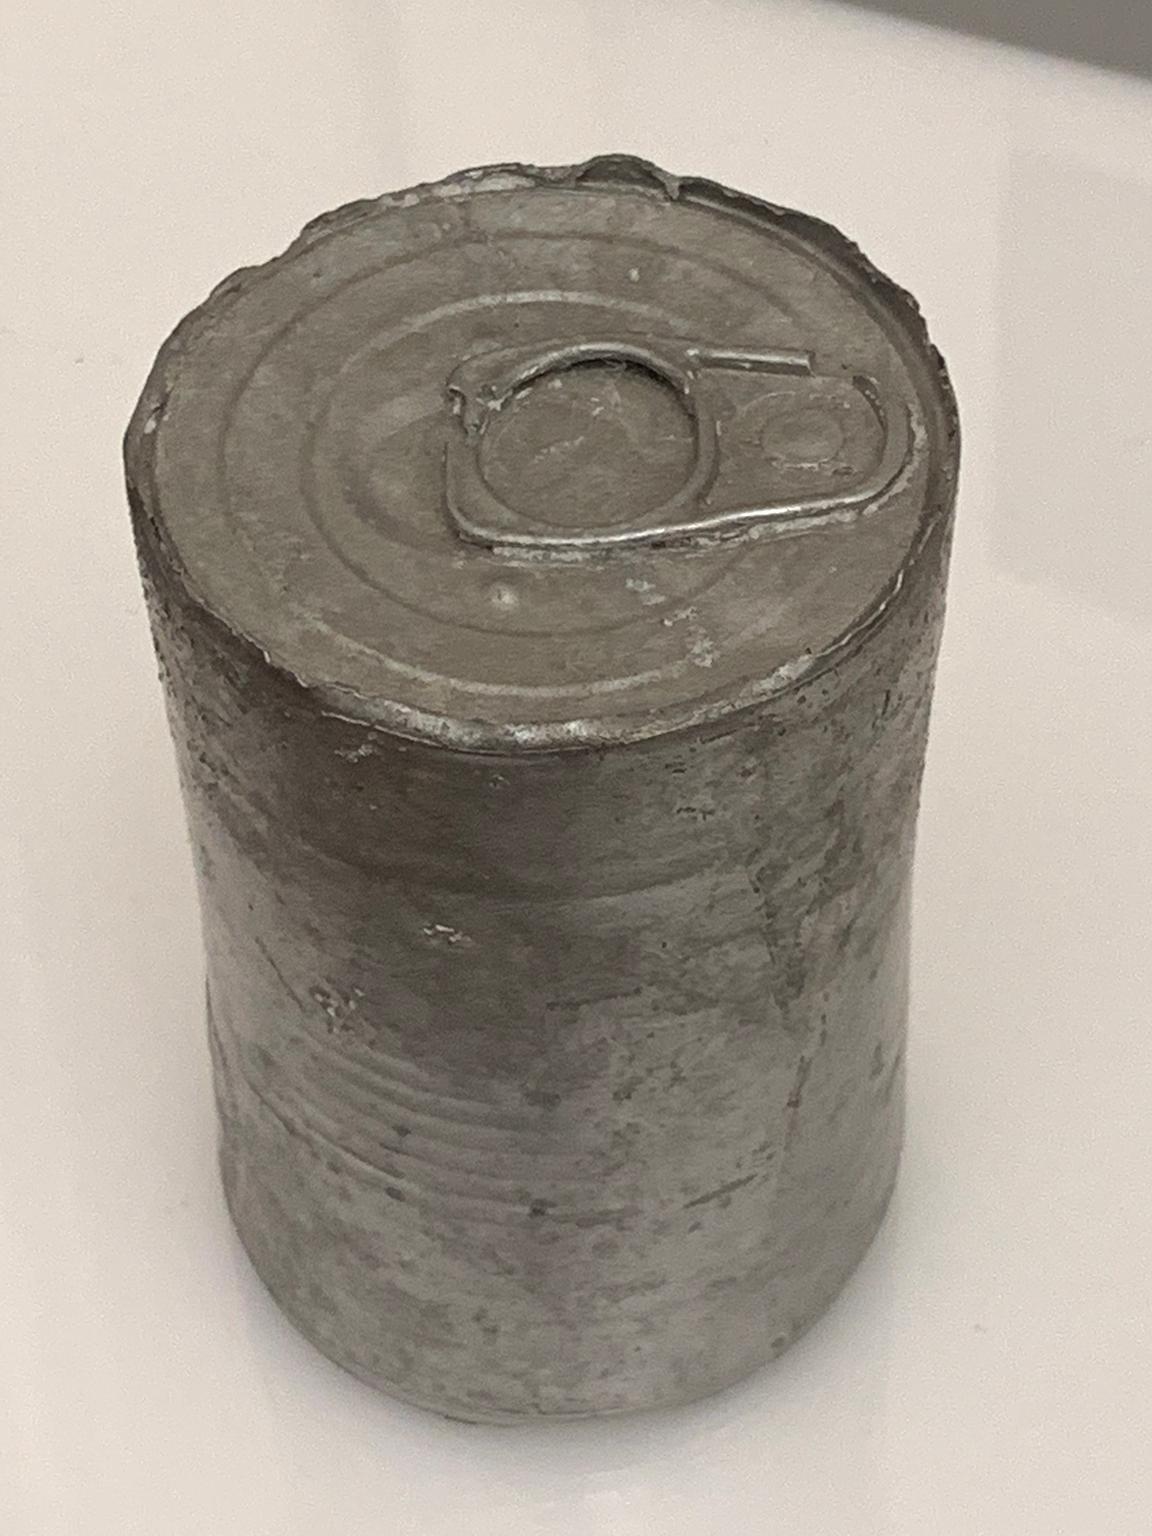 Campbell’s Pea Soup Can, 2017, 3.75”x2.5” inches diameter, cast aluminum, edition of 2.

Pop Artist Andy Warhol made the Campbell’s soup can an icon of Post War America.
This version, cast from an original can, in solid aluminum, is an ode to Mr.